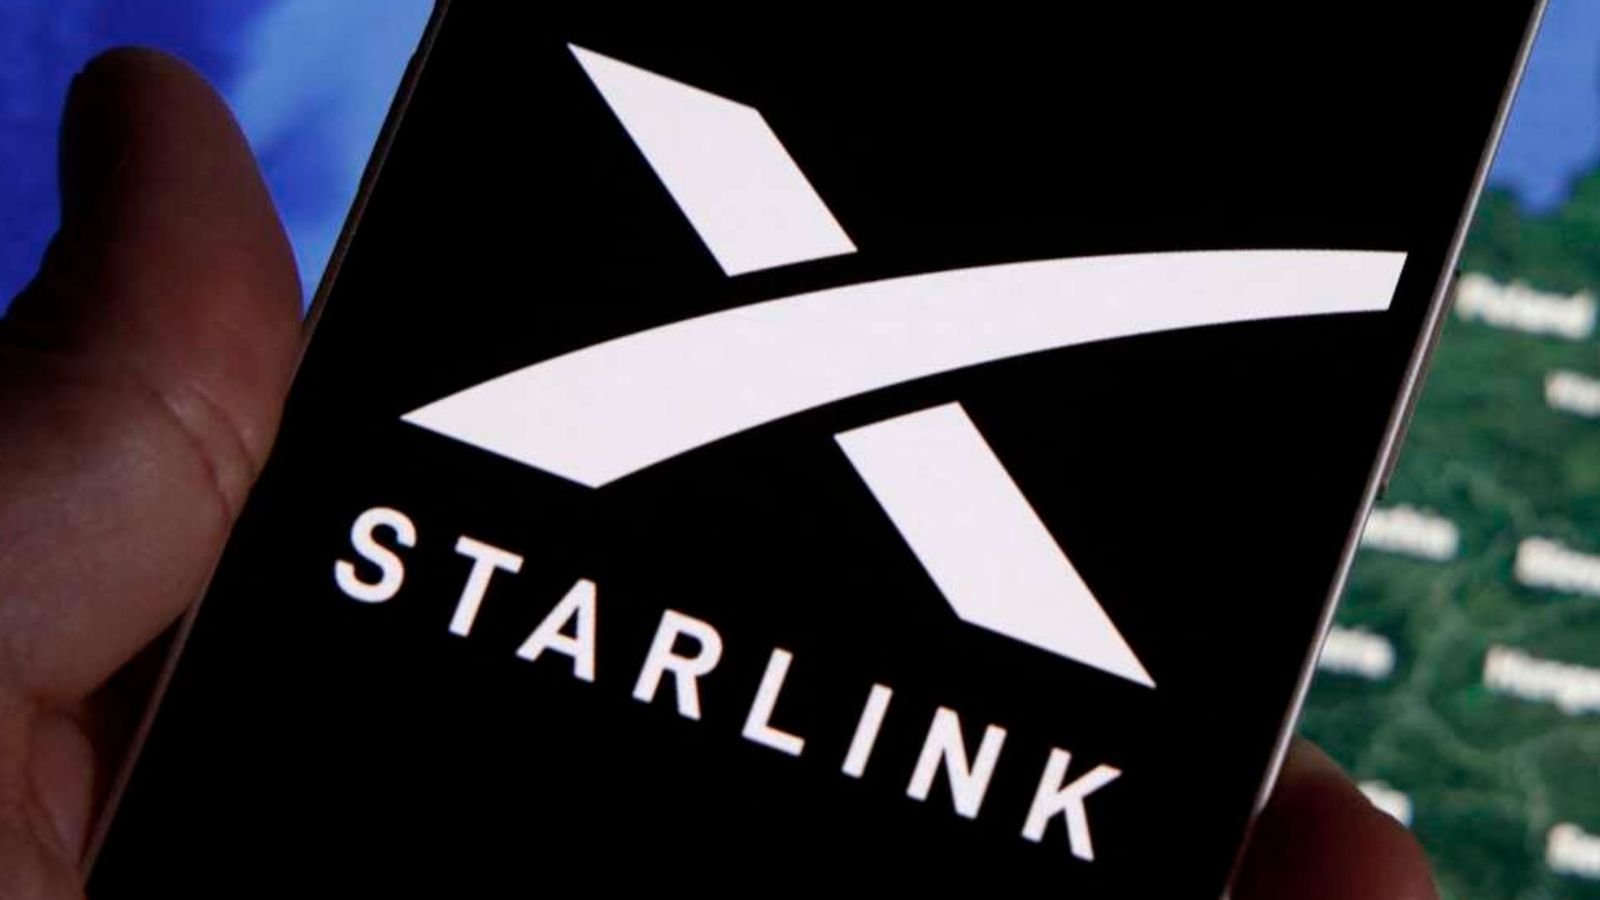 Starlink offers Kenya users 56pc cut in installation costs